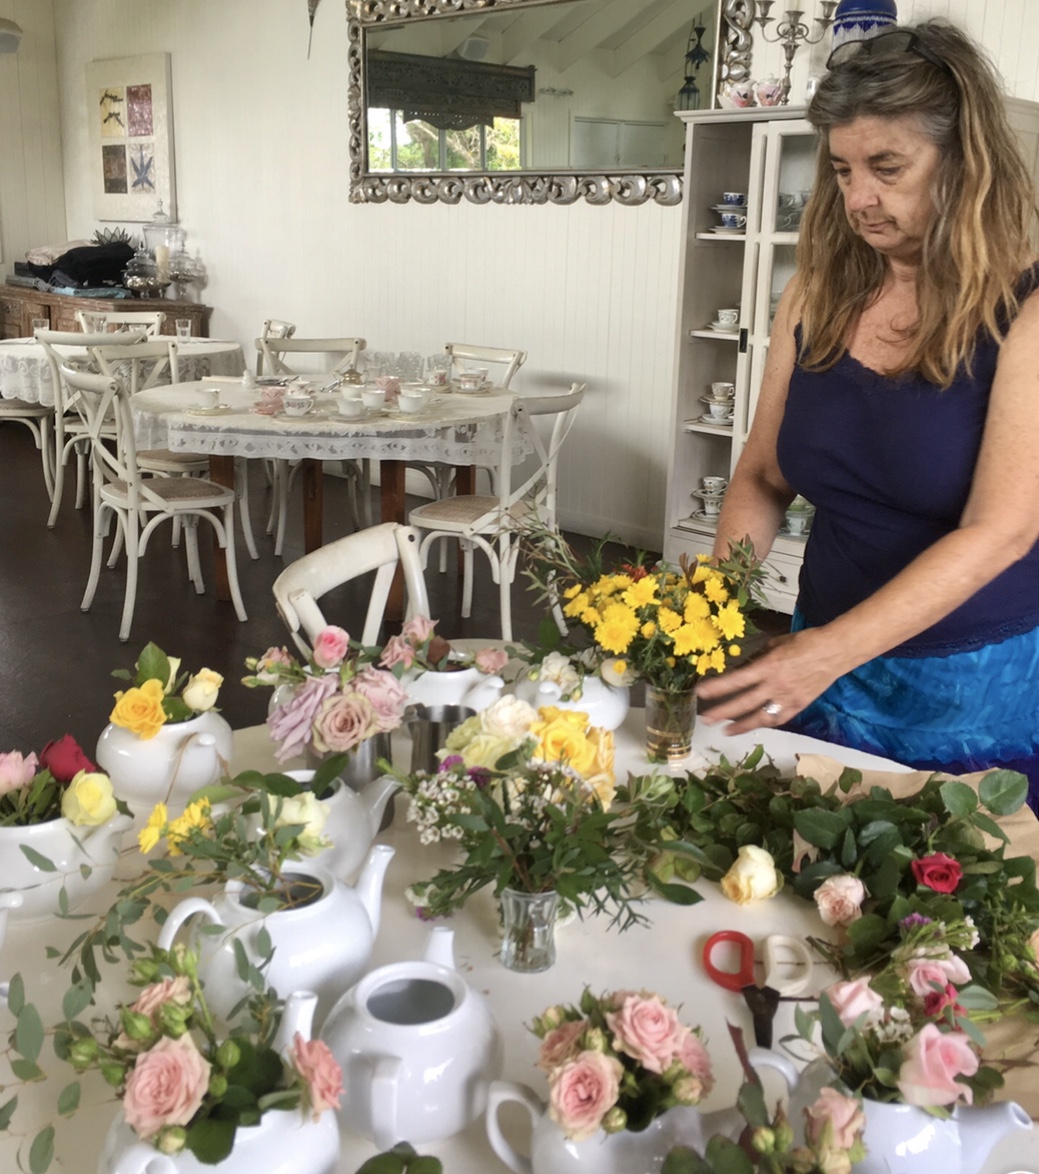 Ali arranges sweet posies for each table in the tea rooms.